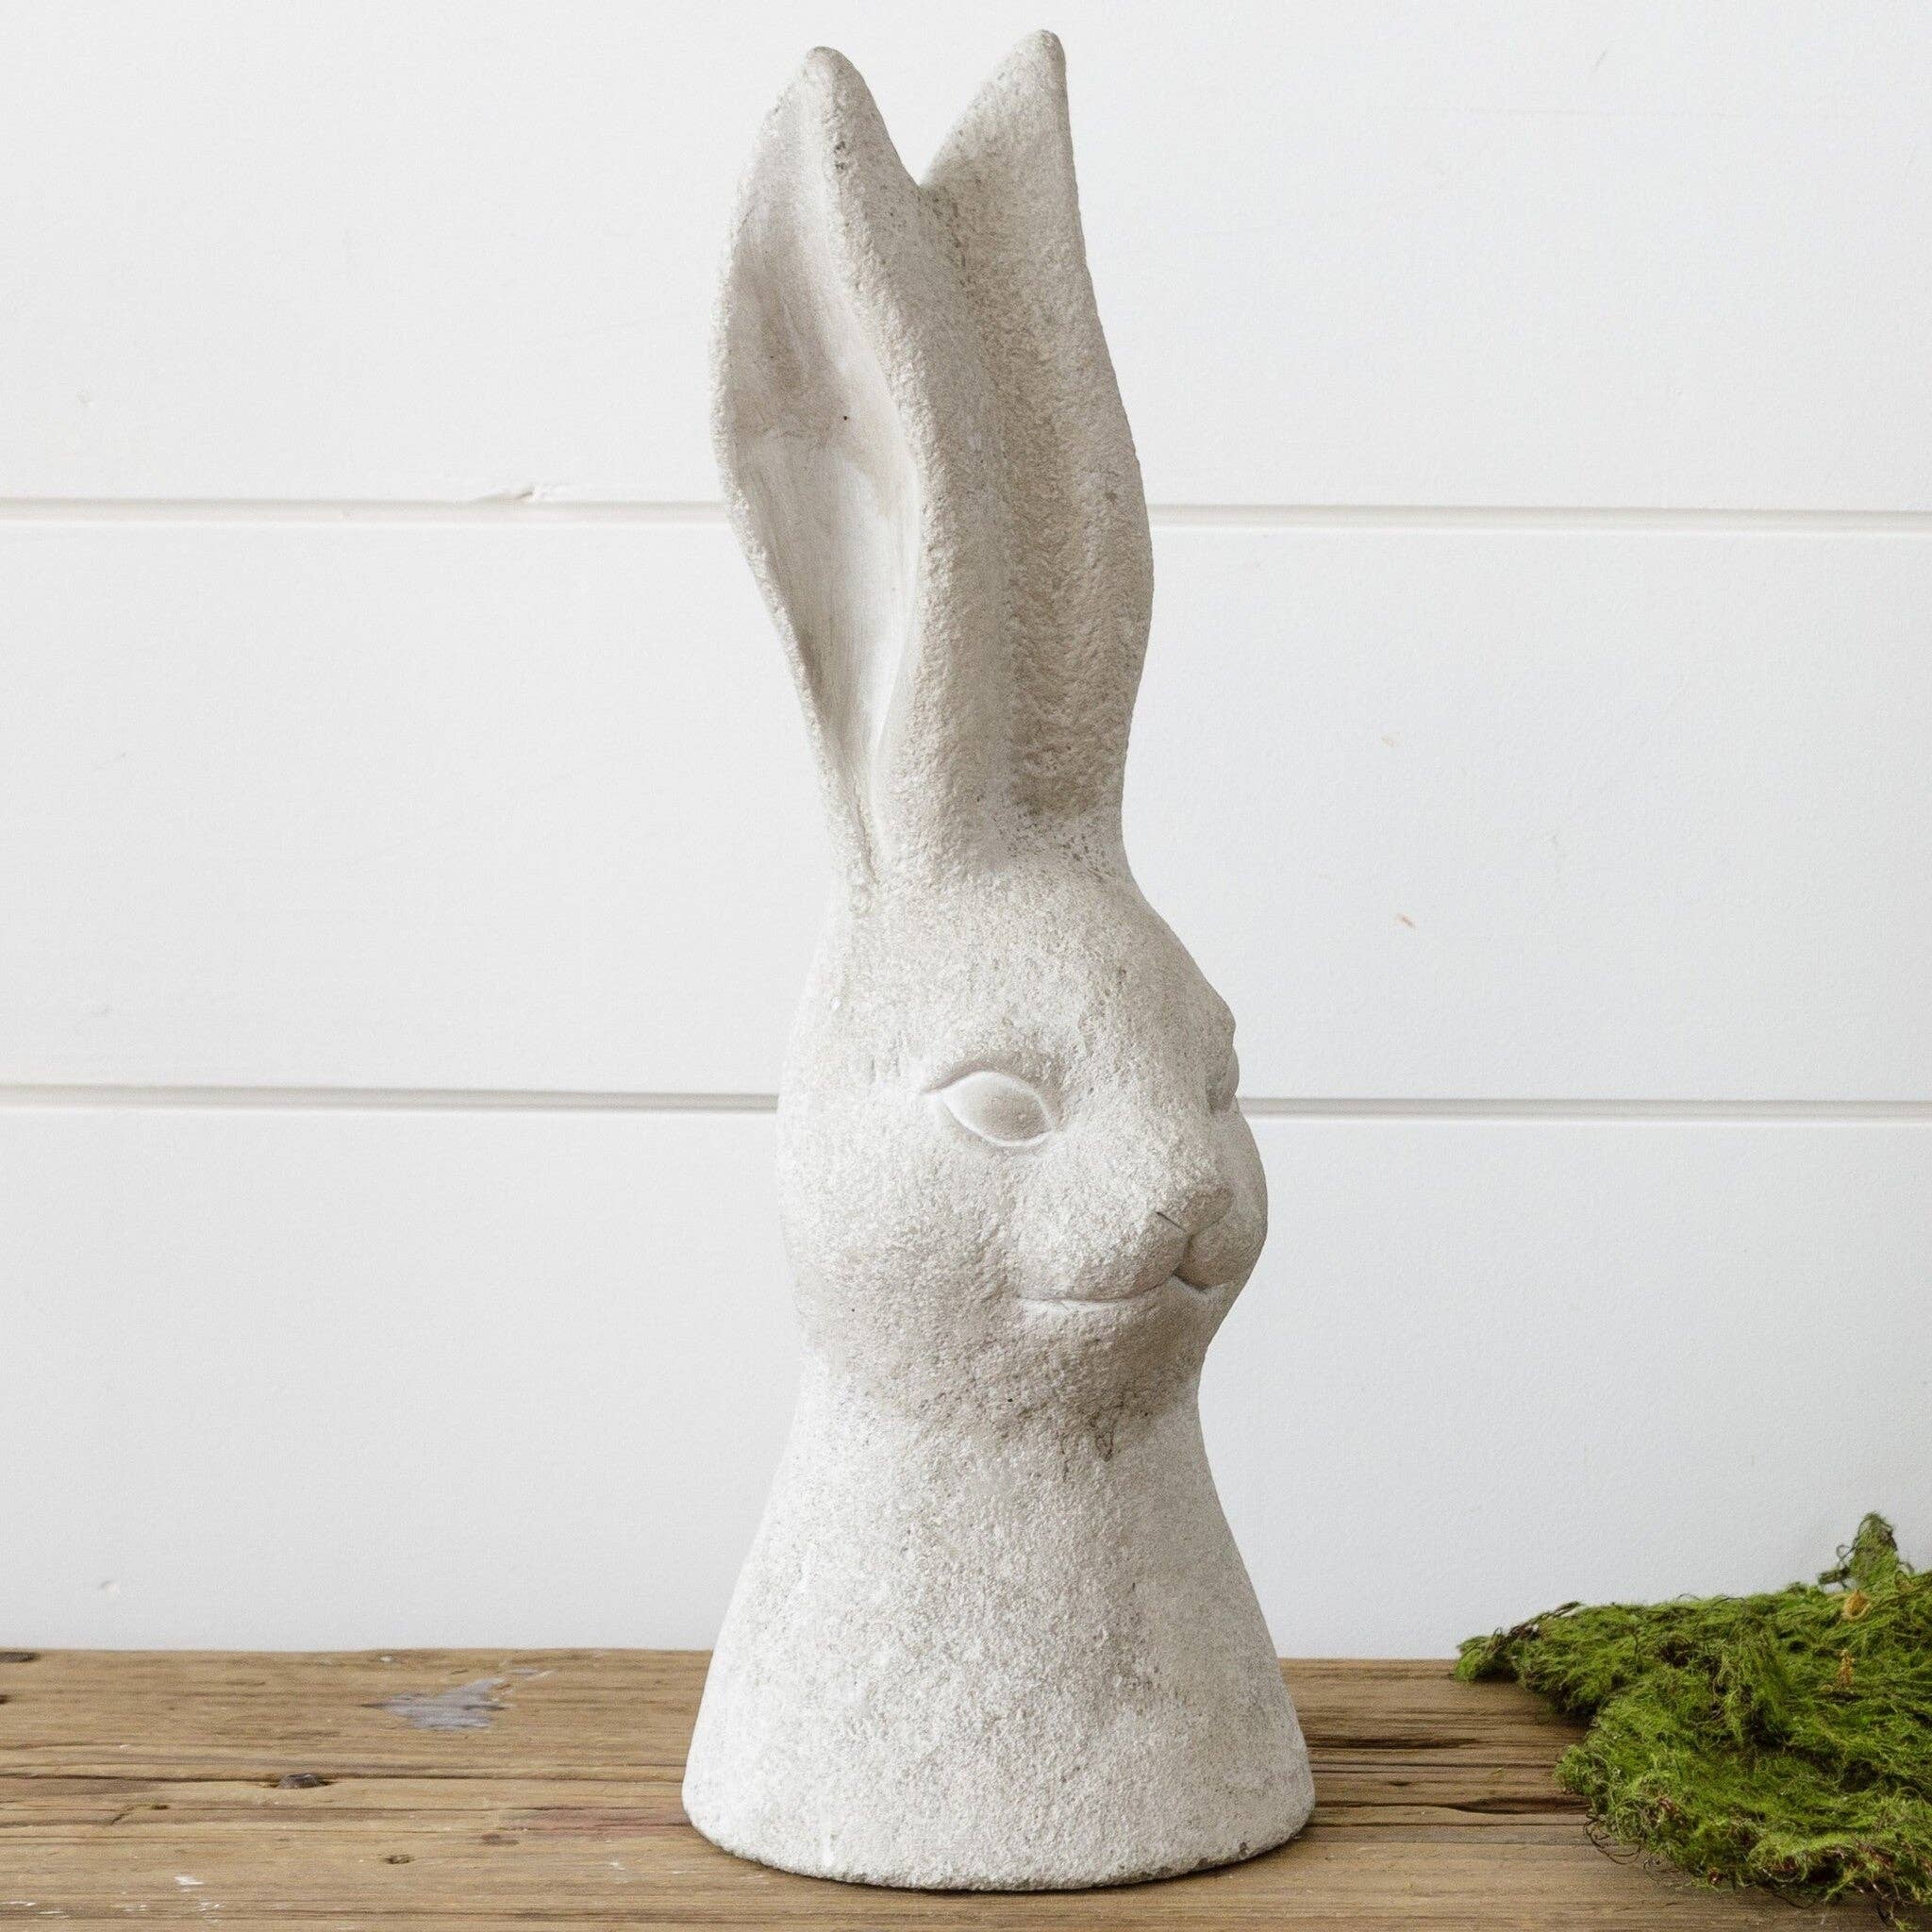 Wholesale Small Cast Iron Rabbit for your store - Faire